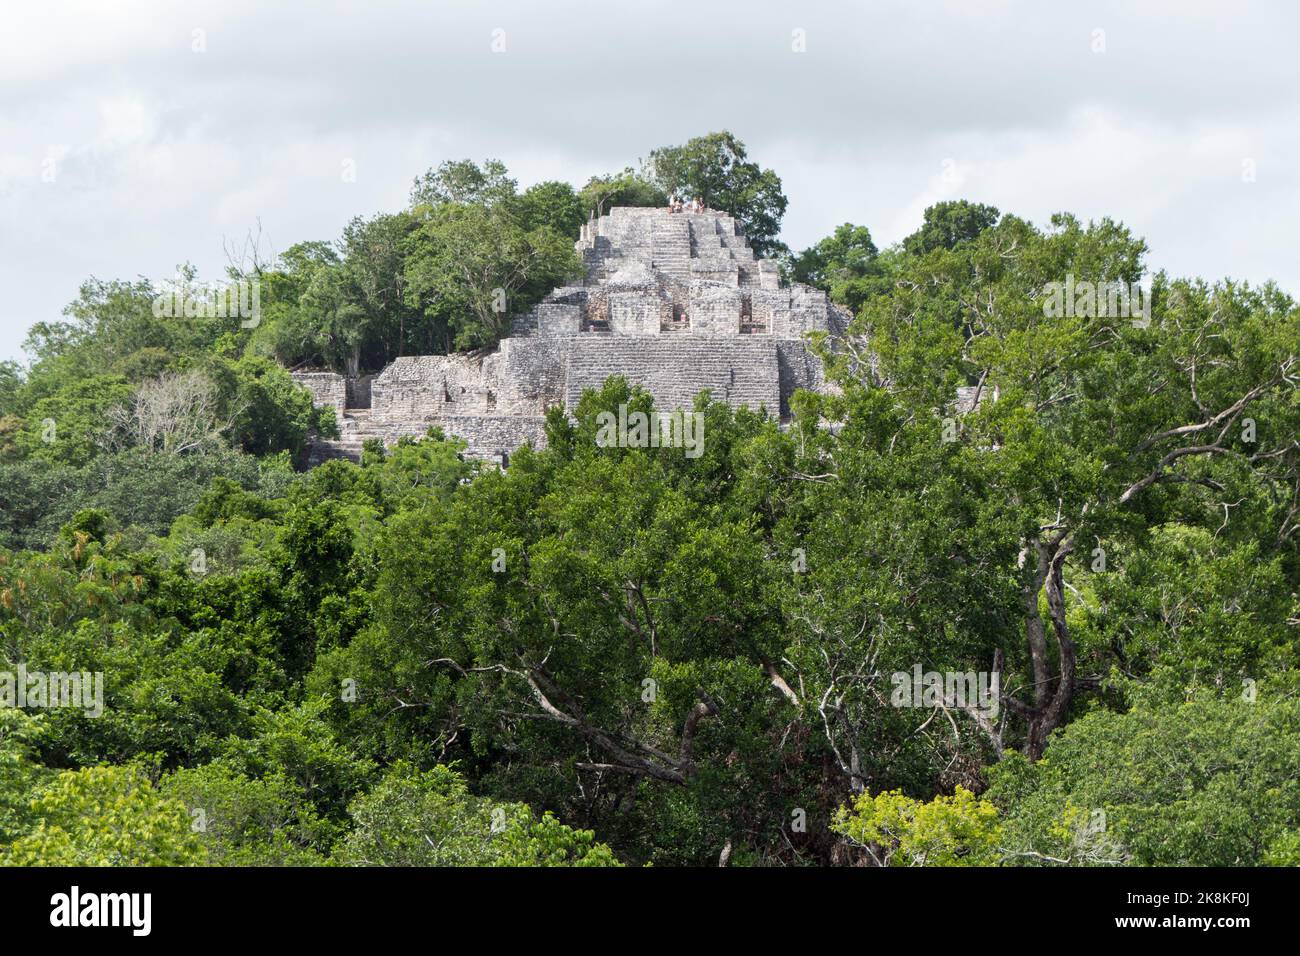 View of Calakmul, a Maya archaeological site deep in the jungles of the Mexican state of Campeche. Structure 2 (or Structure II) seen from Structure 1 Stock Photo